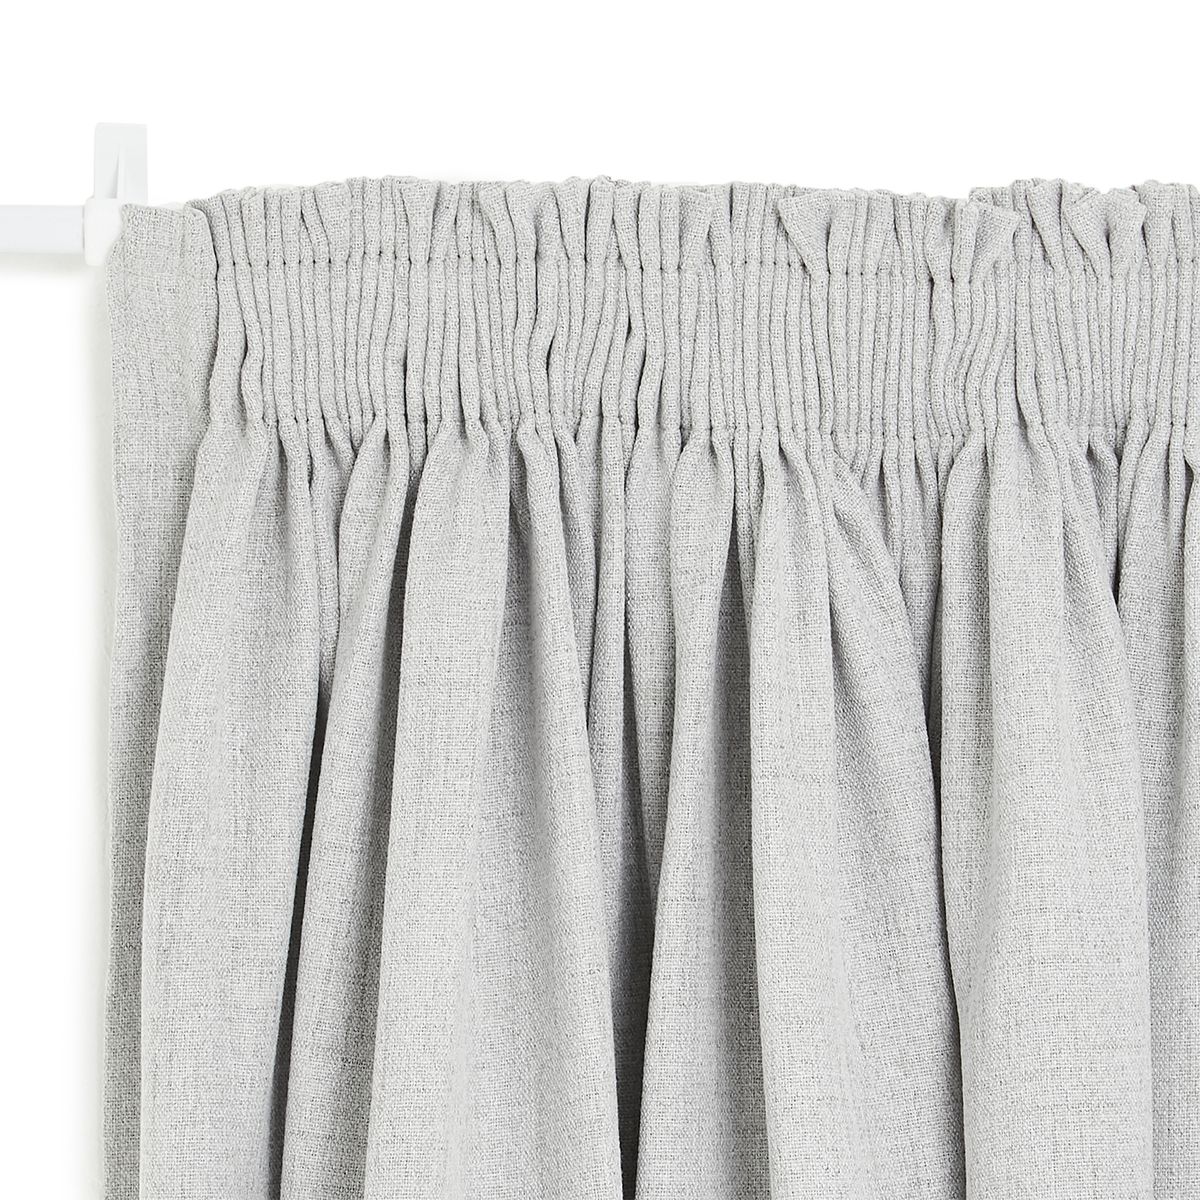 George & Mason - Meridian Taped curtain | Shop Today. Get it Tomorrow ...